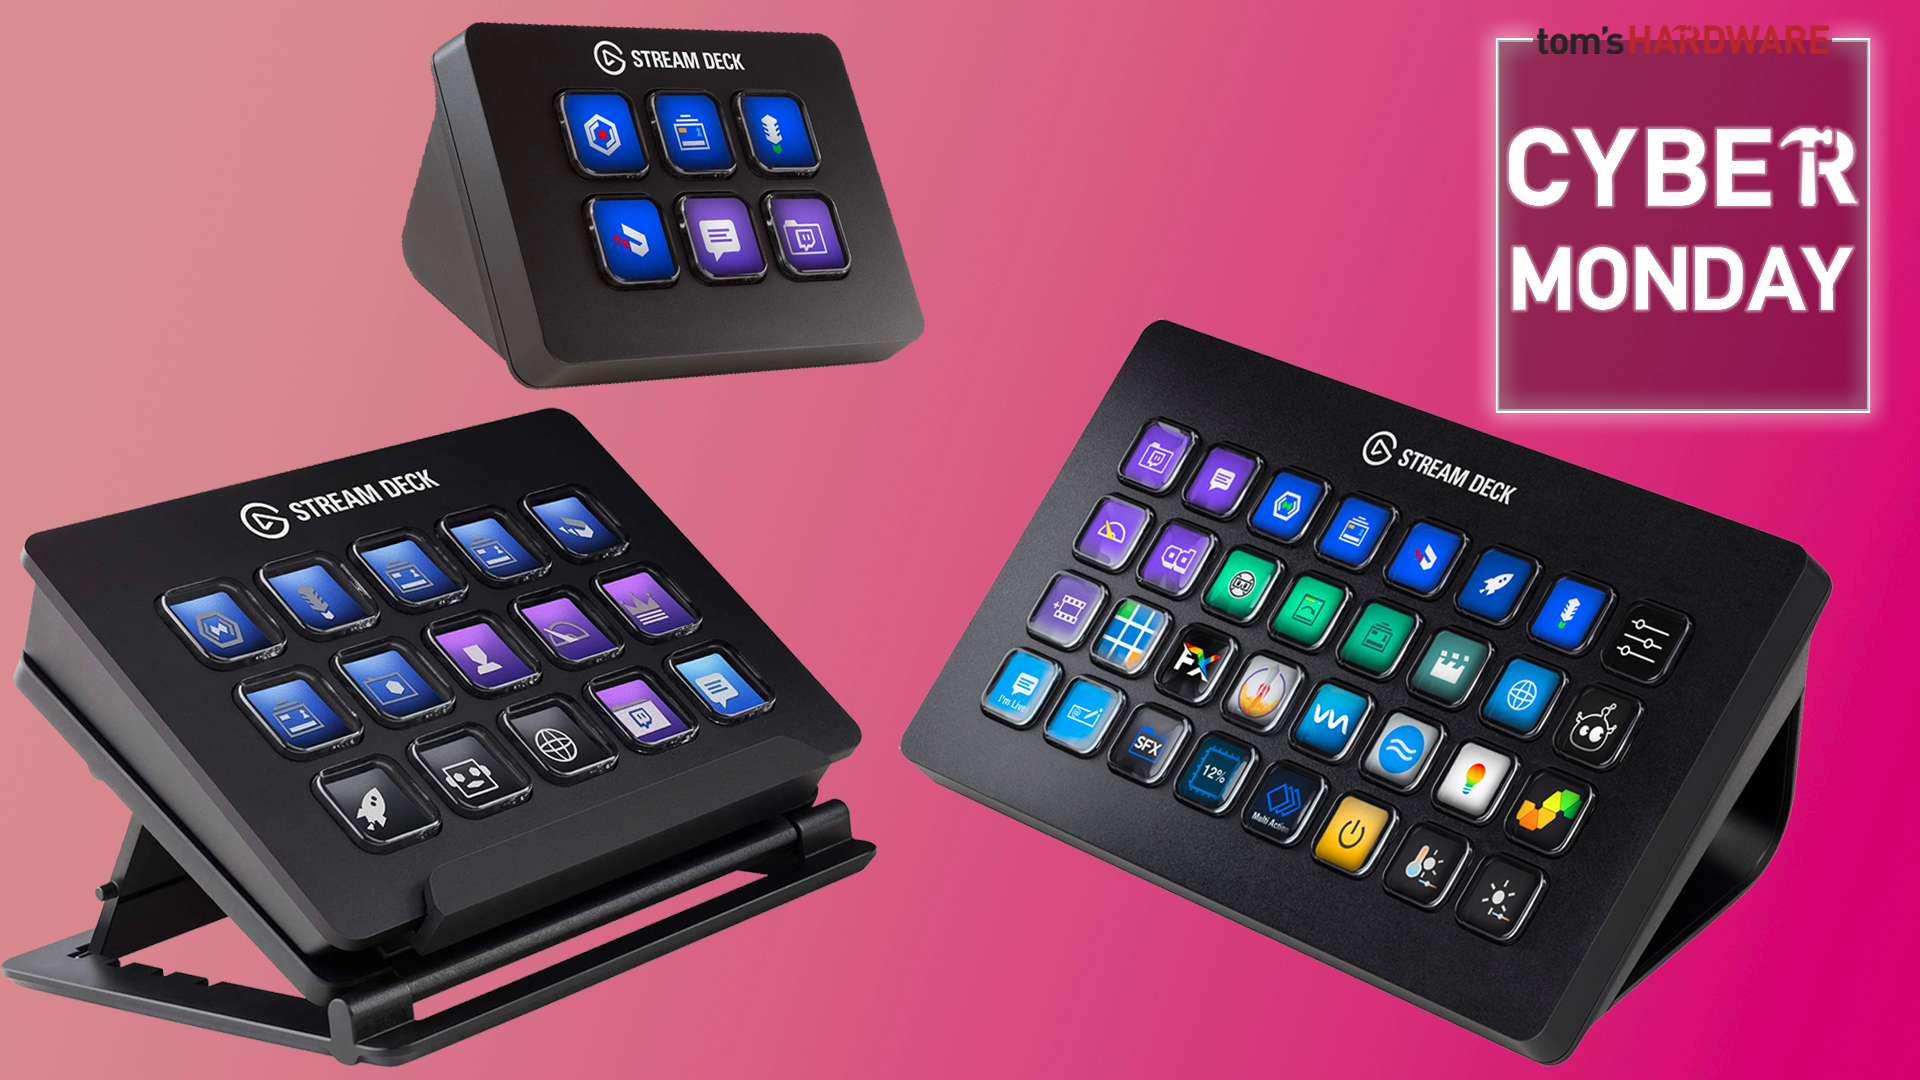 A Stream Deck Mini is the perfect little Zoom controller - The Verge